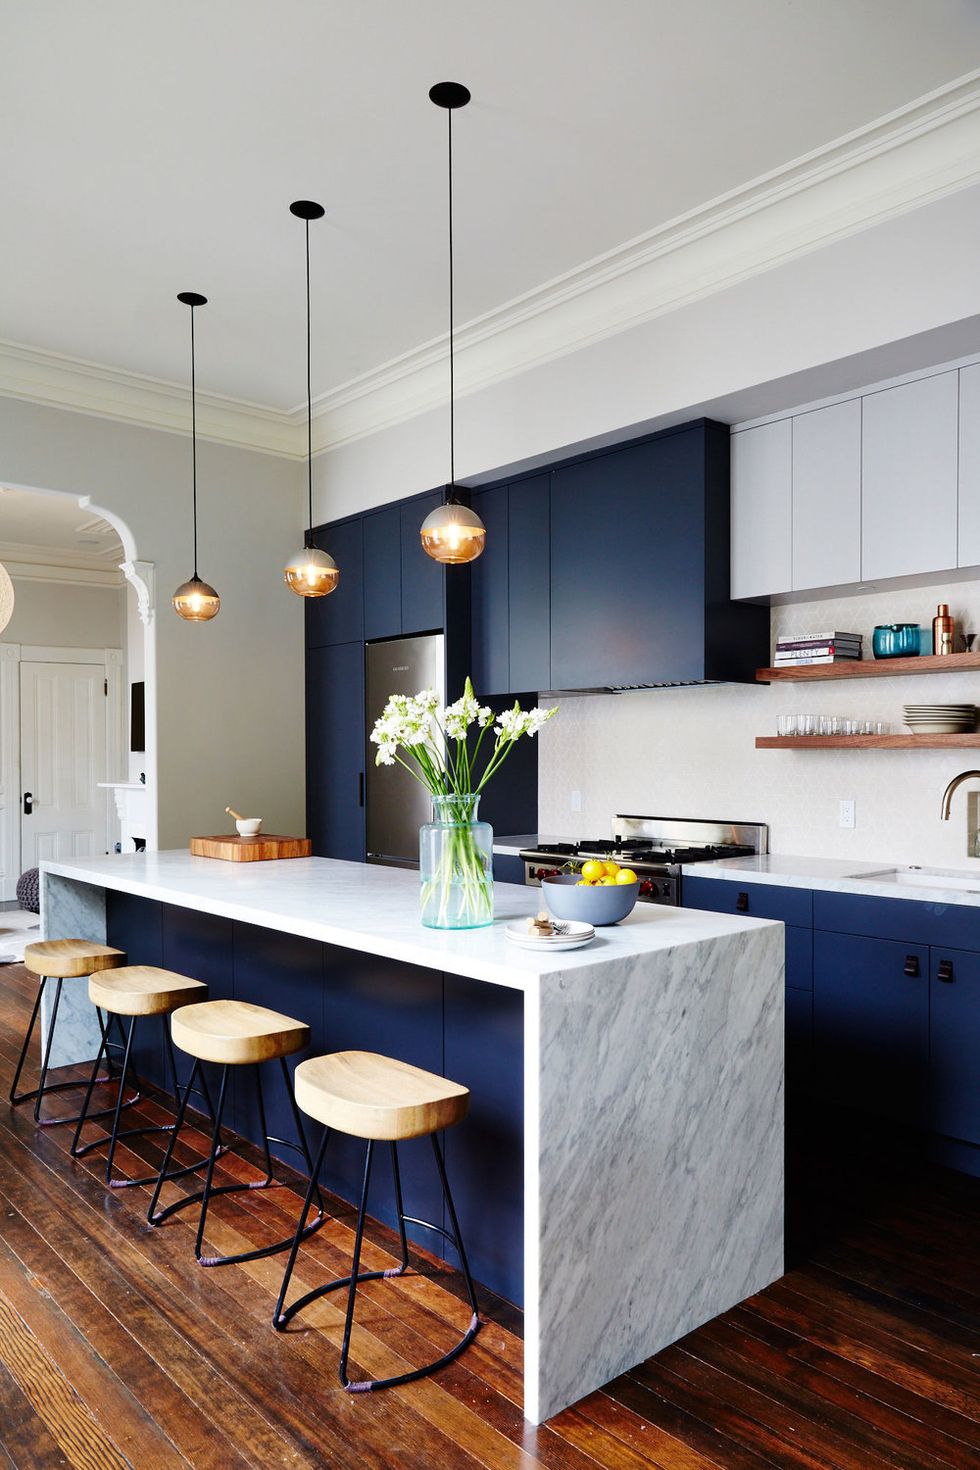 Mix Blue with Gray Kitchen Cabinets